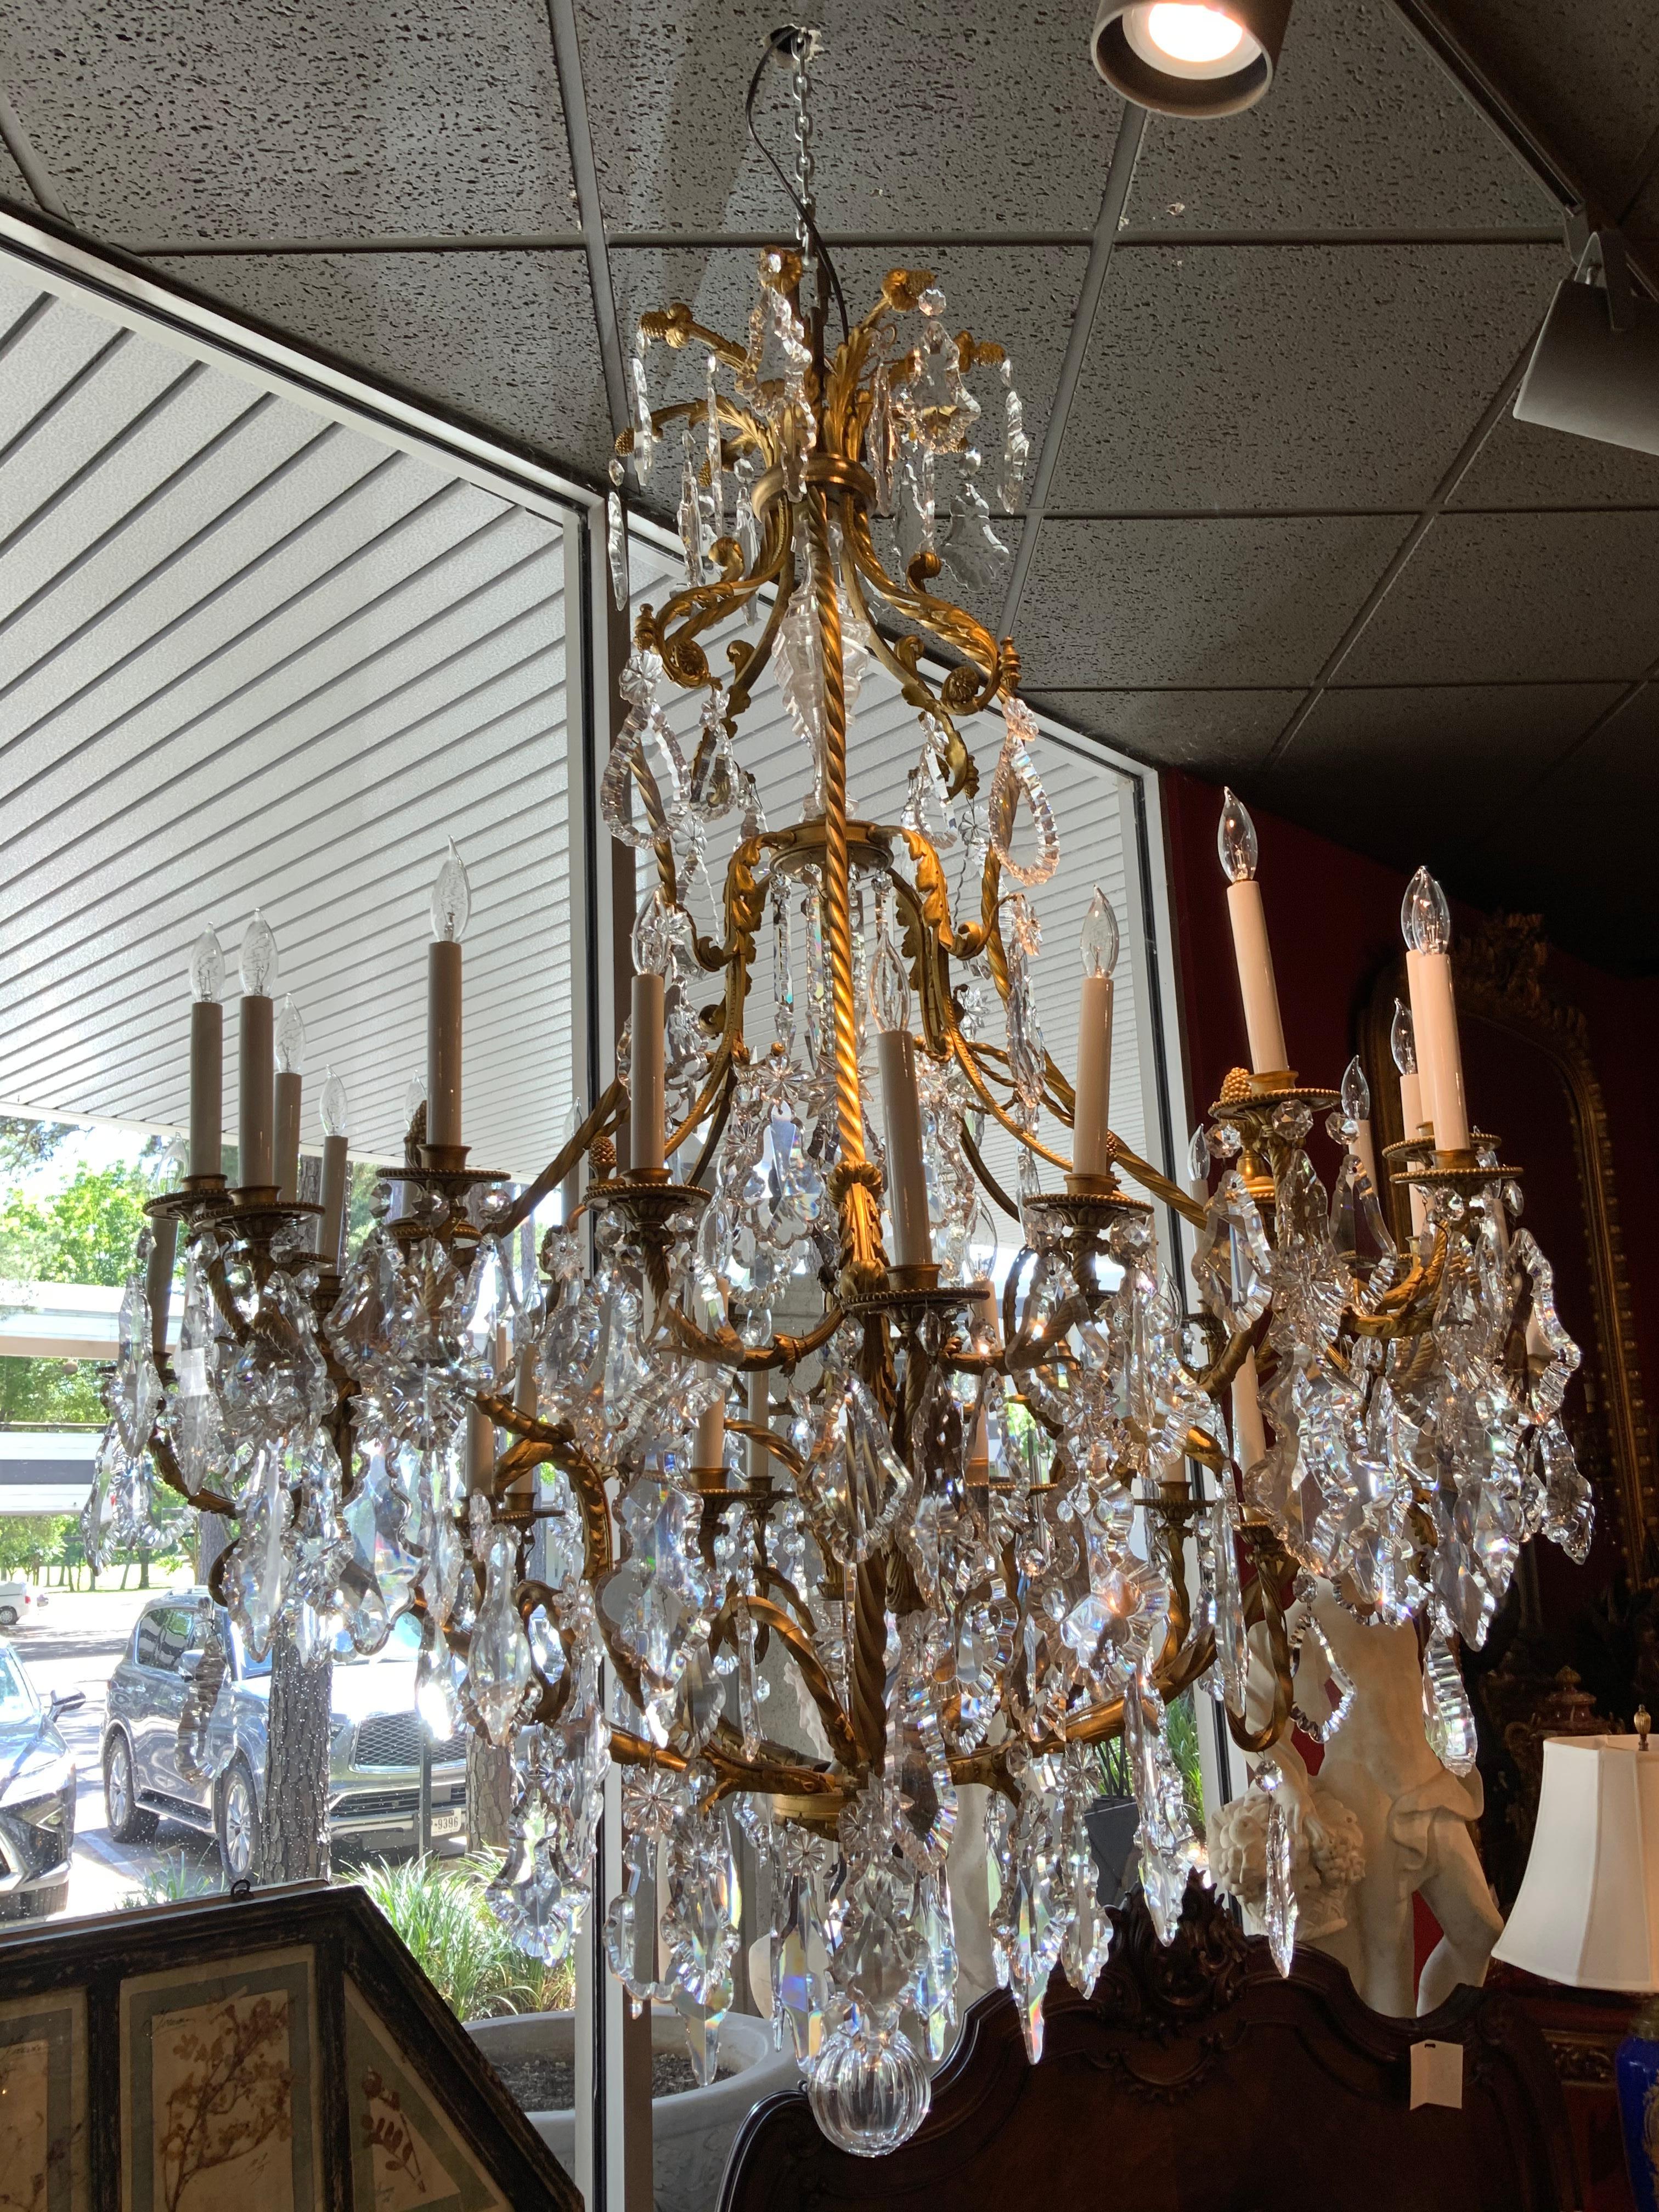 Elegant crystal chandelier having 24 lights, complete without missing or chipped crystal.
Six bronze roped arms emanate from the top crown. Exquisite scrolling arms each support 
The candles. Beautifully cast acorn finials are mounted throughout.